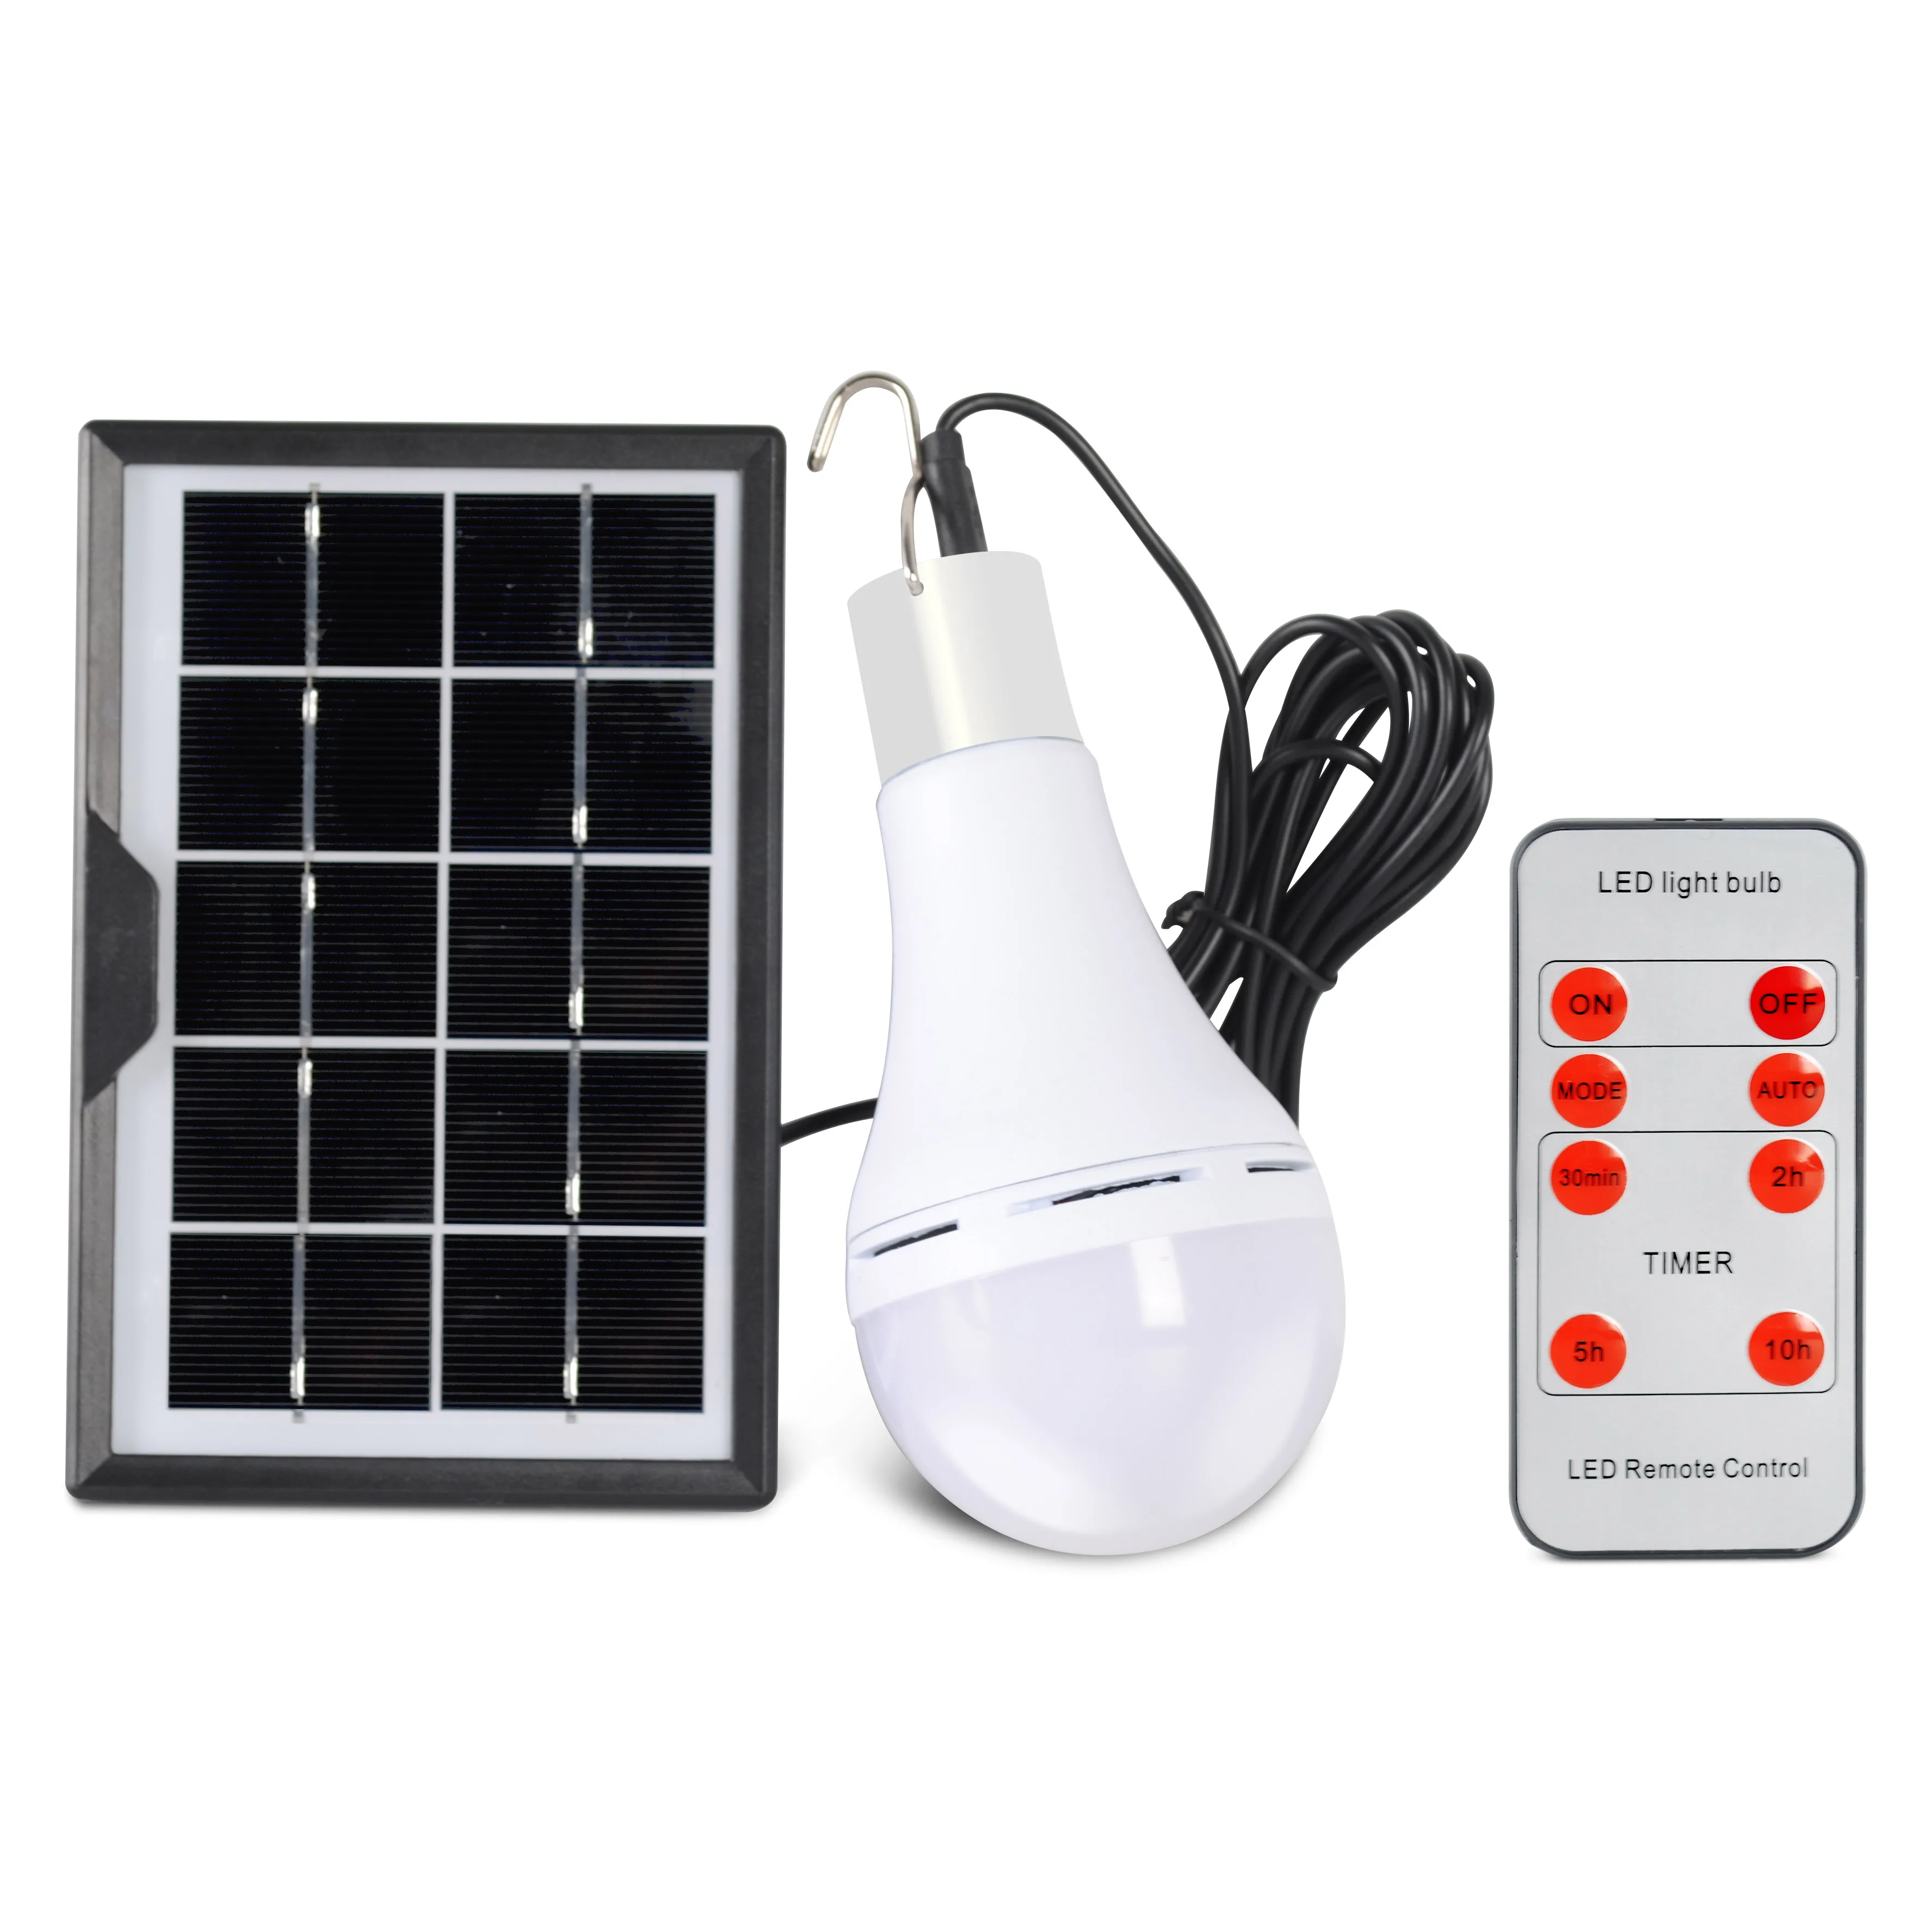 7W Solar Light Bulbs Outdoor Rechargeable Portable 200-300LM Solar Emergency LED Bulb with Remote control